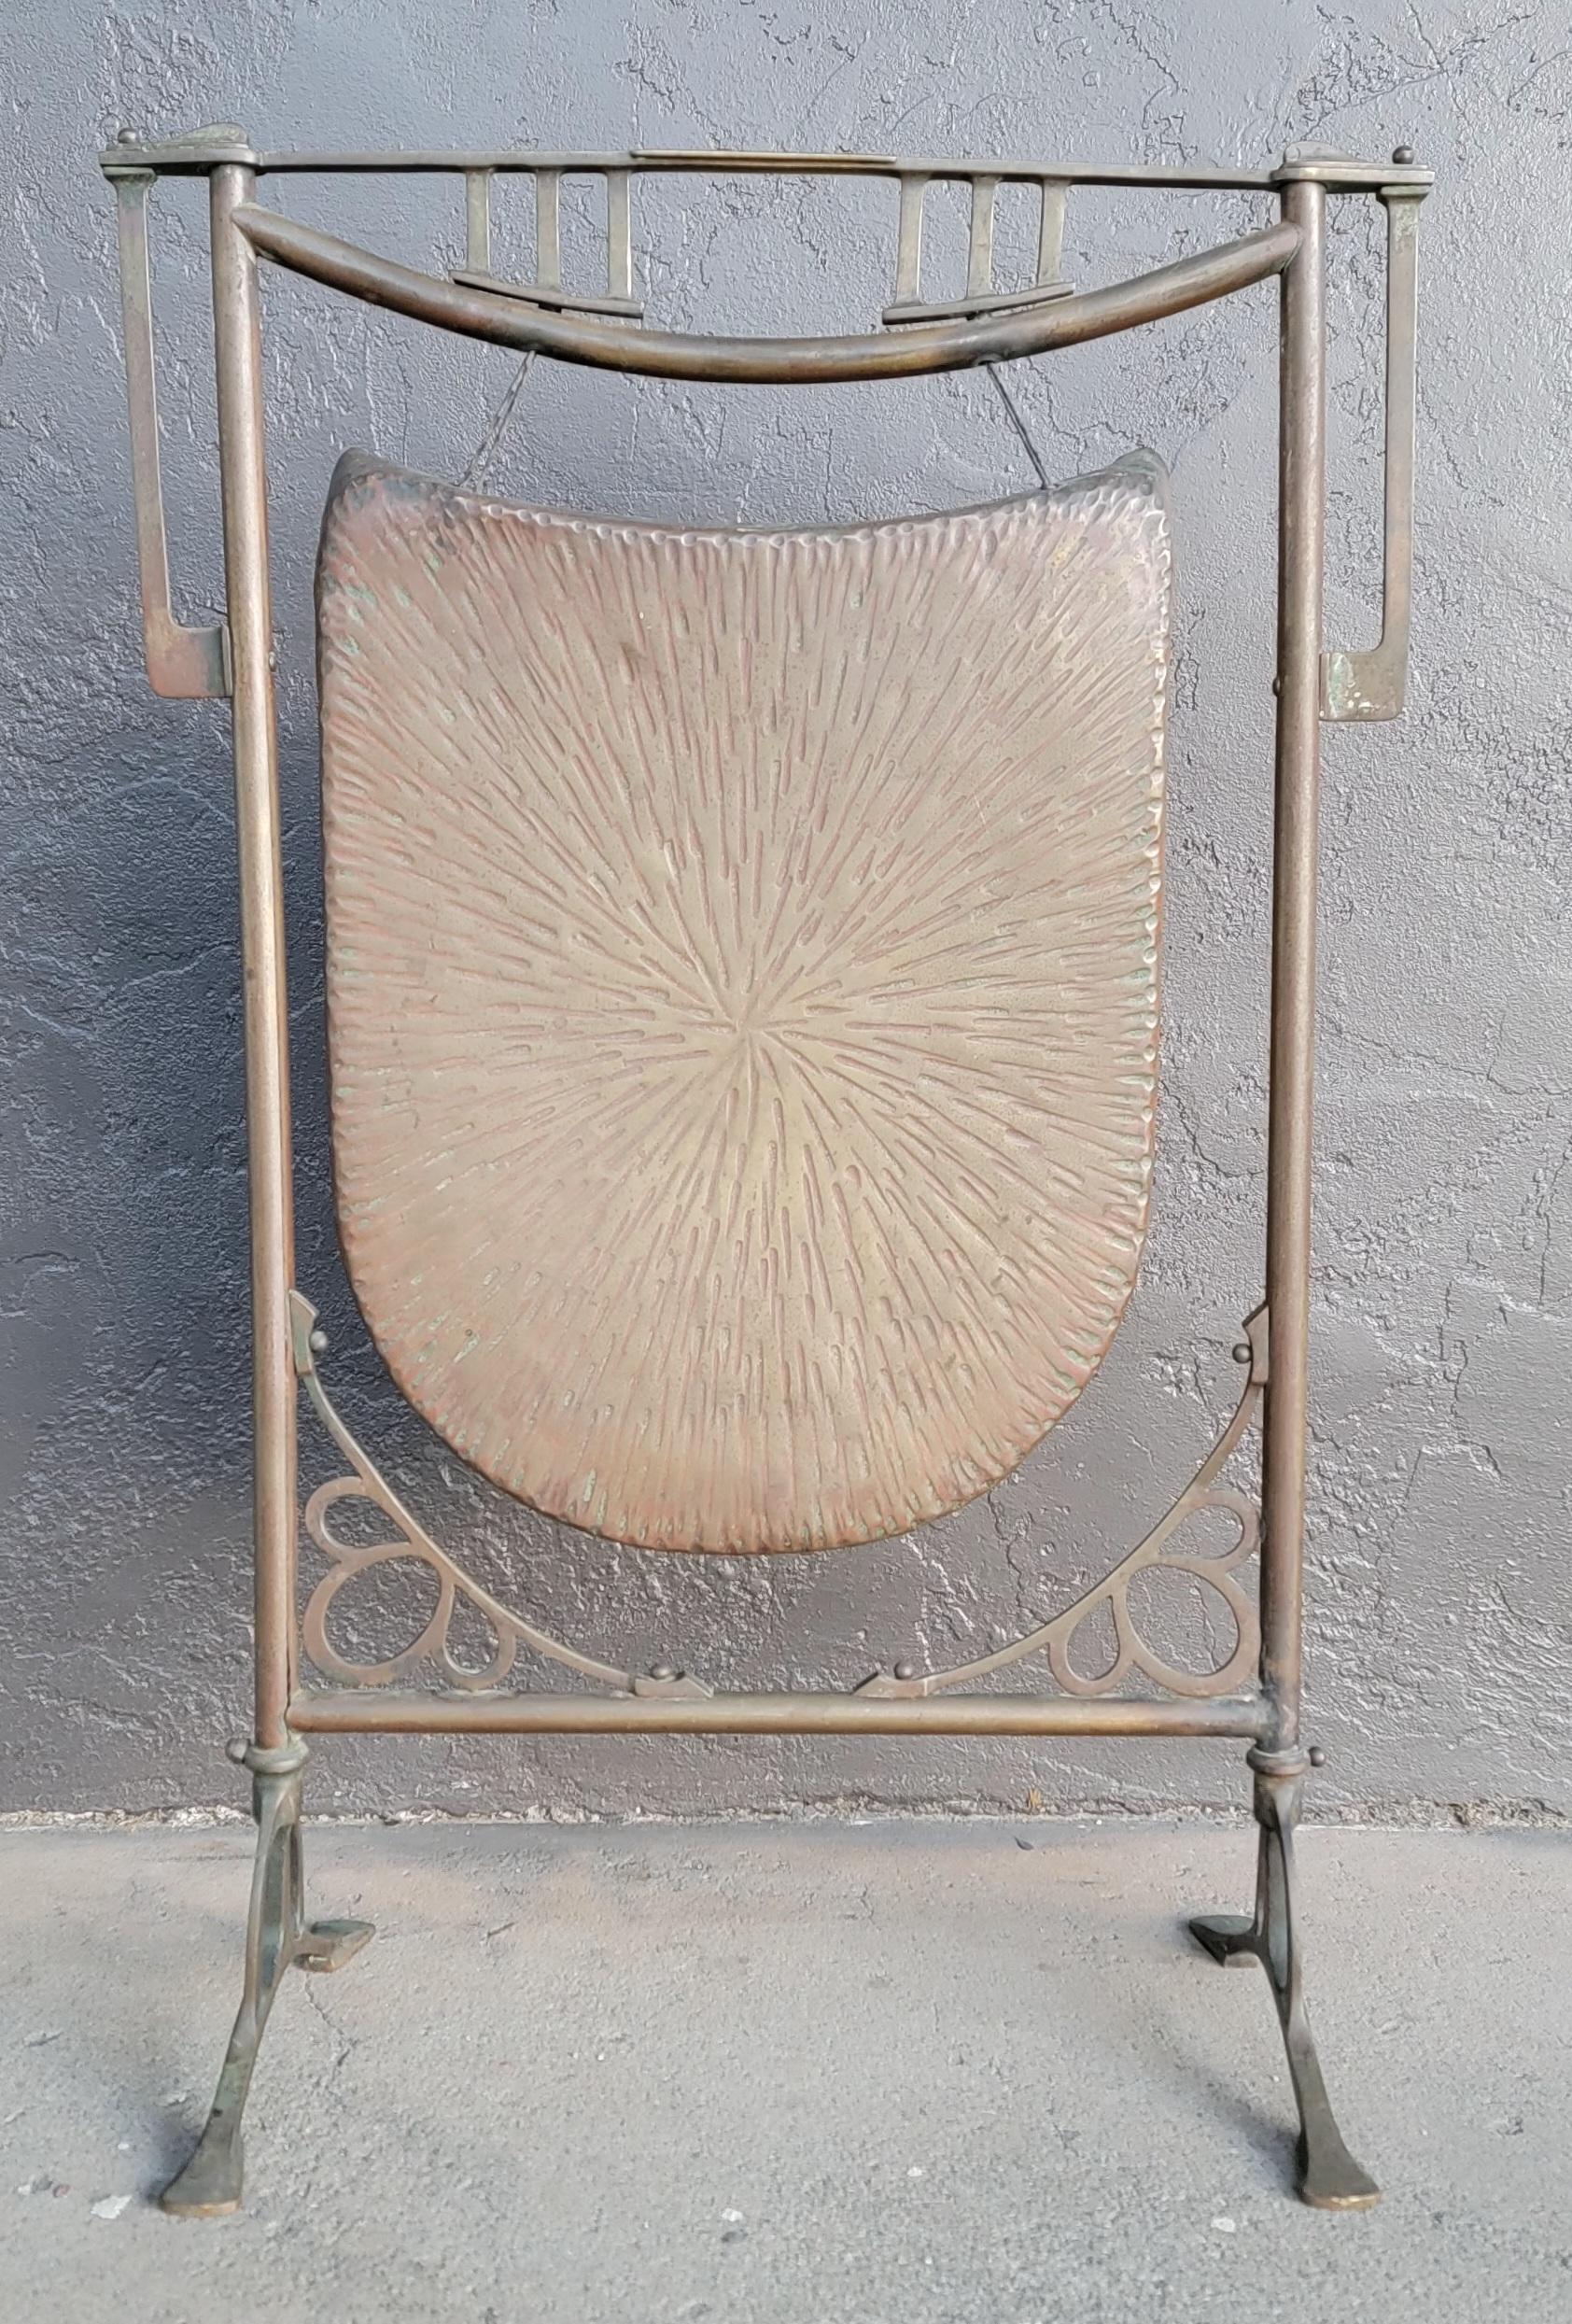 A transitional Art Nouveau / Arts & Crafts gong made of solid hammered copper and brass. Circa. 1910. Striker is not original to gong.